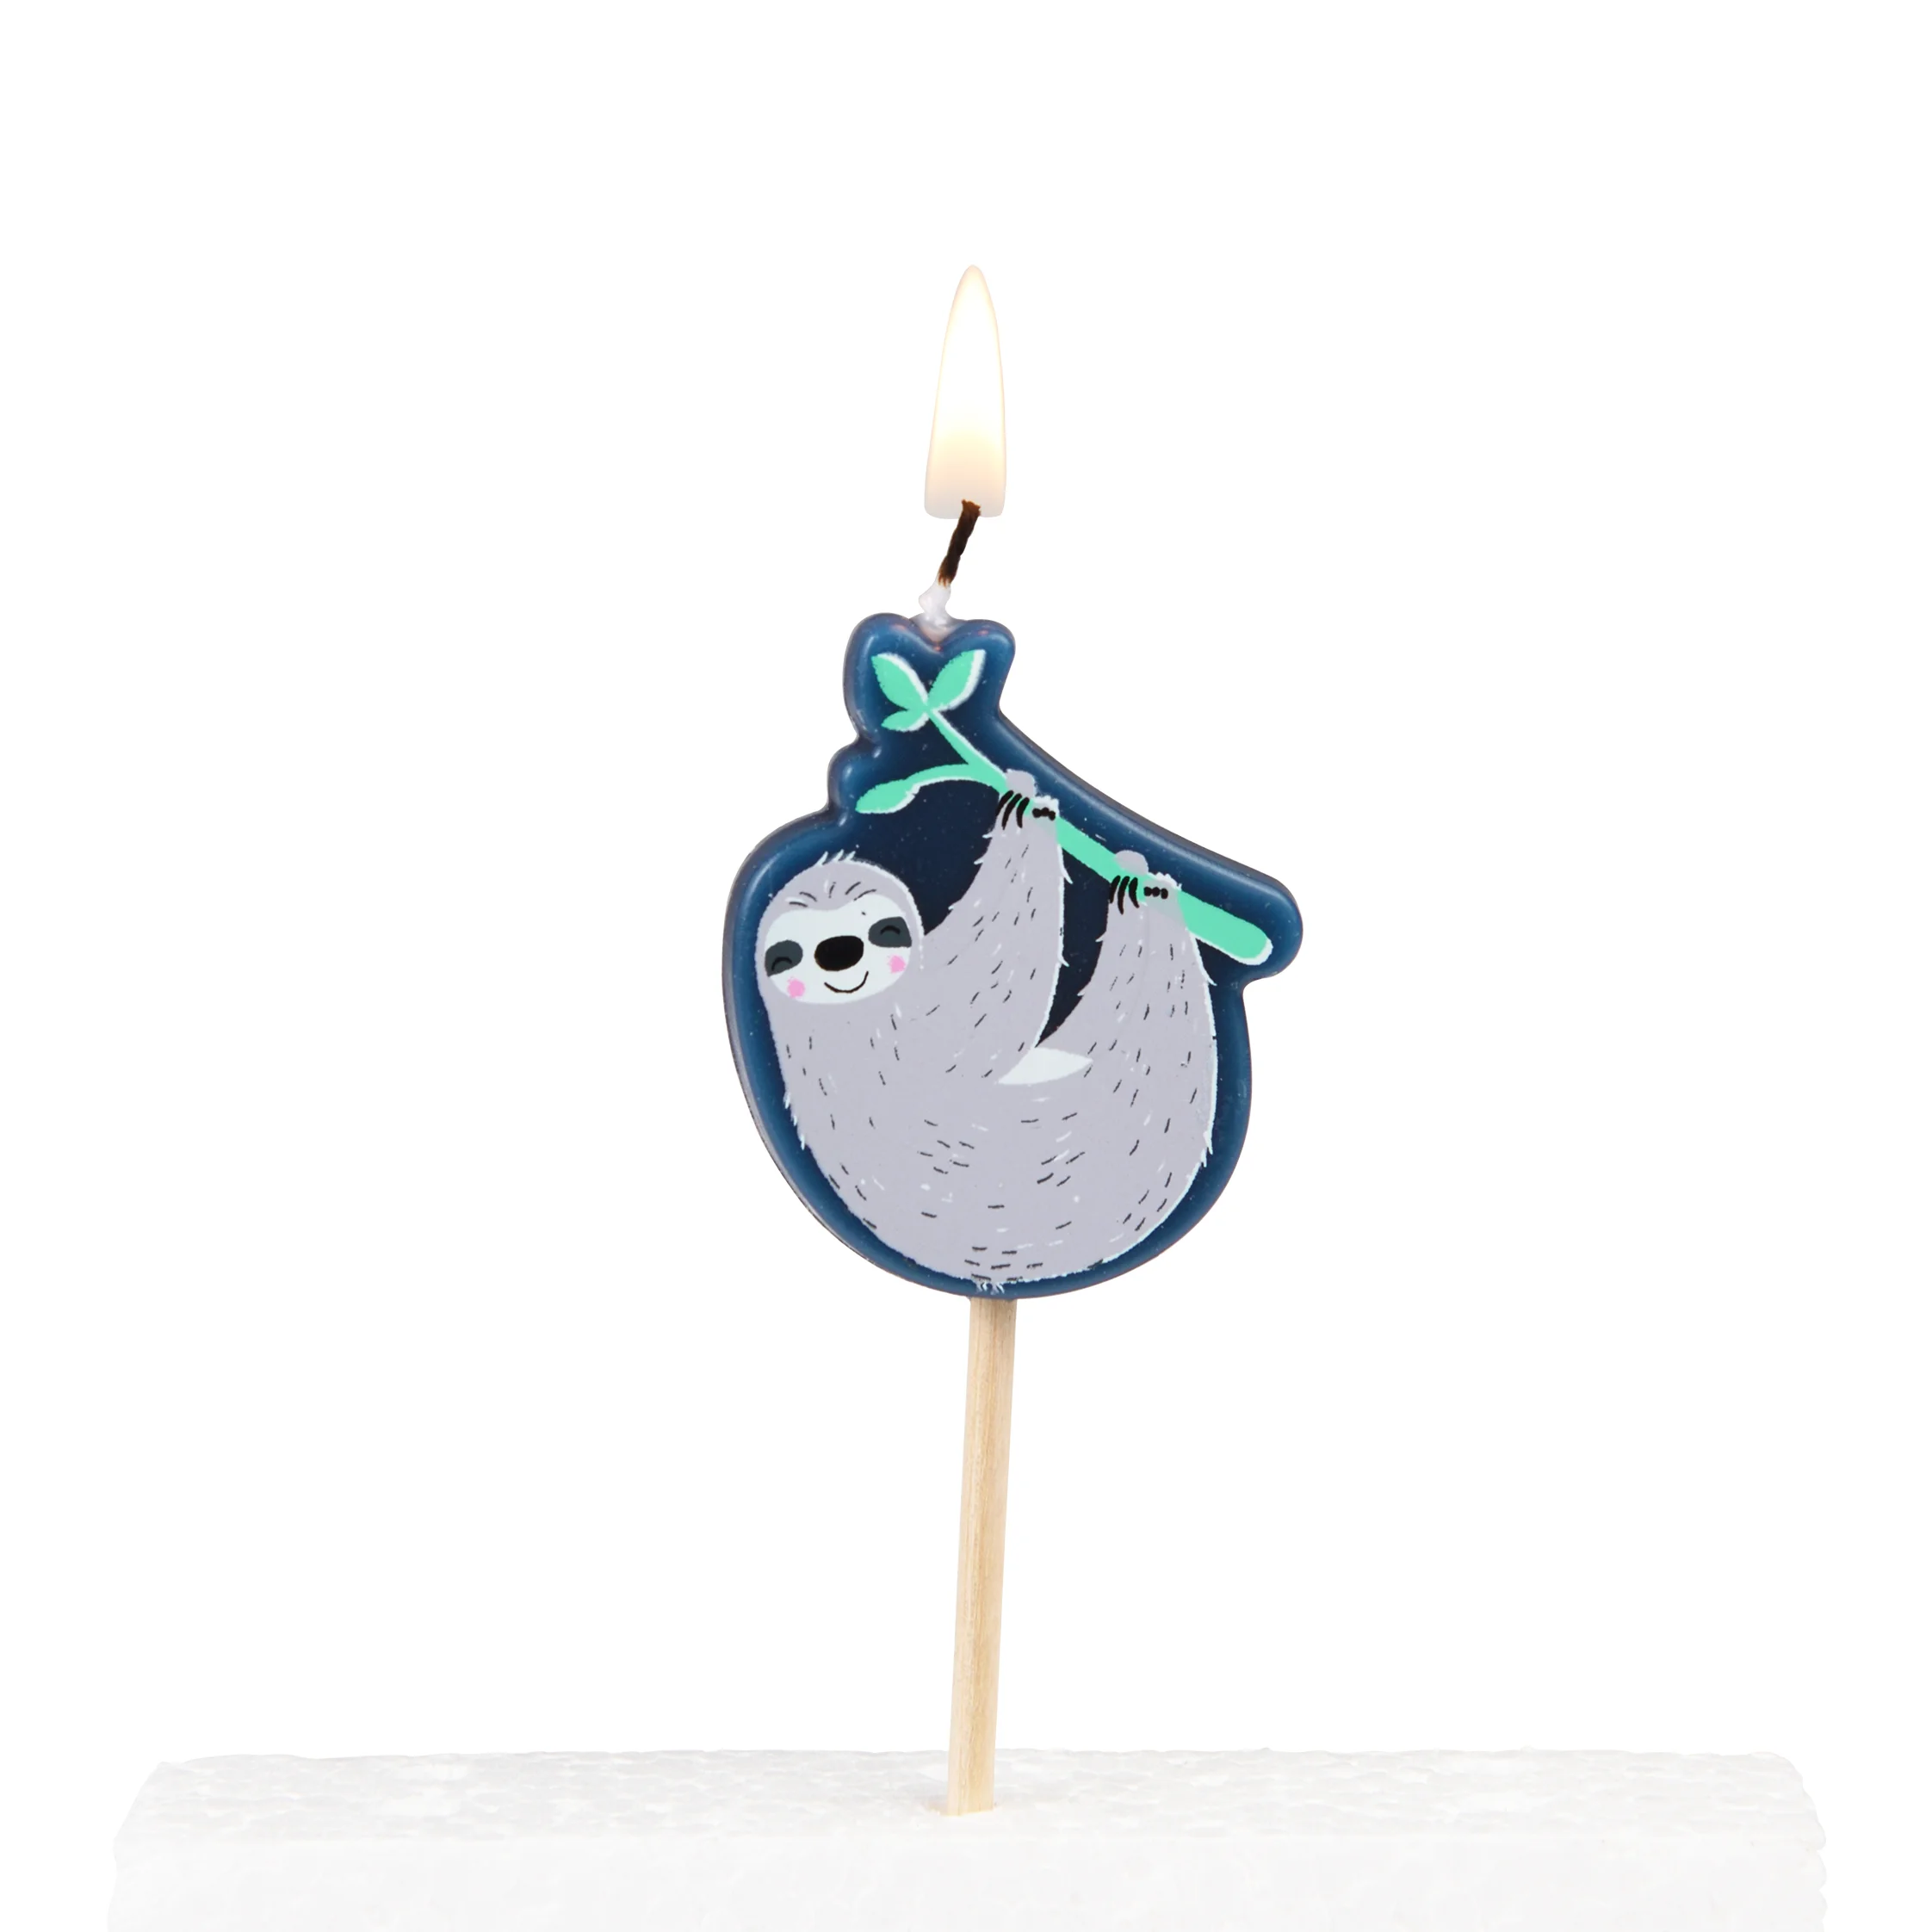 party cake candles (set of 6) - sydney the sloth